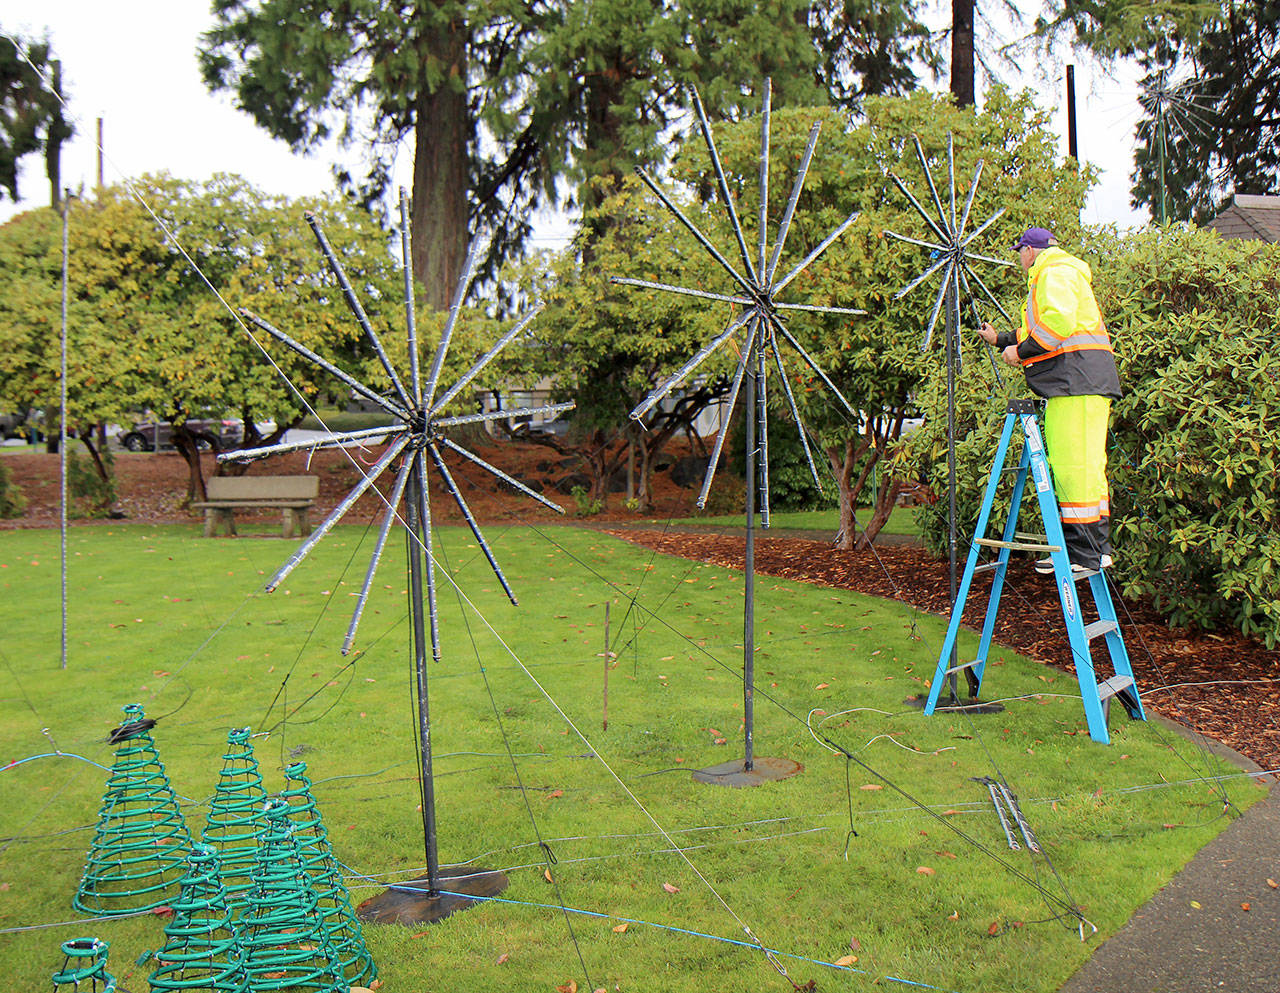 Ken Collins work on the Jingle Lights display Wednesday, Nov. 4, 2018, in Fleet Park in Montesano. Collins, a former tugboater, donated the lights to the city of Montesano after displaying them at his Central Park home for about 12 years. The lights will be on display with shows Friday and Saturday nights between Thanksgiving and Christmas. Photo by Michael Lang | Grays Harbor News Group